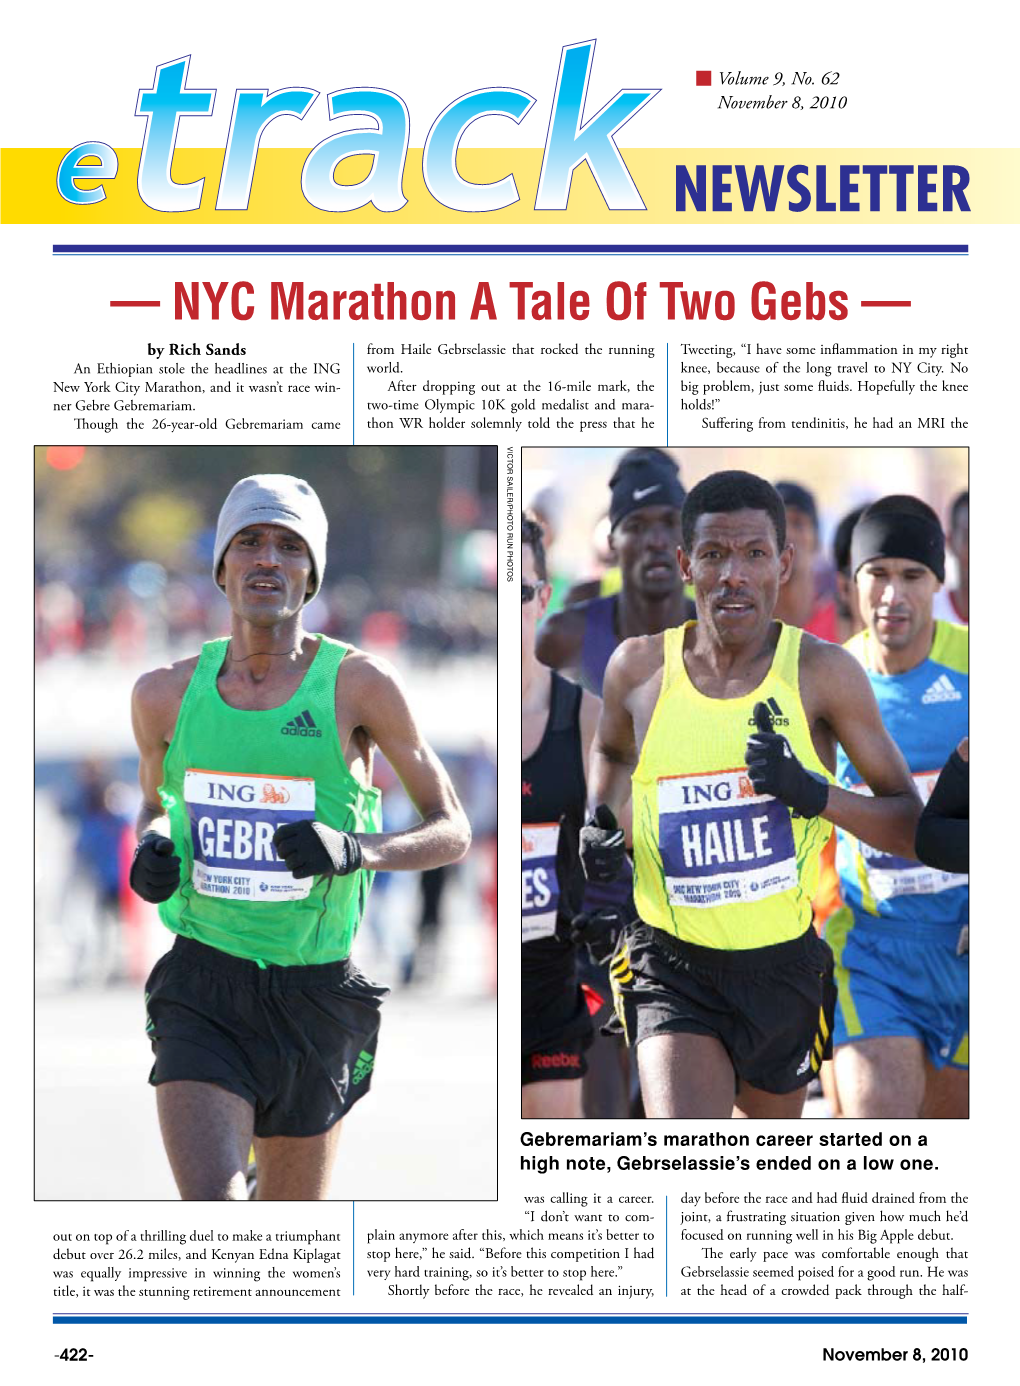 — NYC Marathon a Tale of Two Gebs —